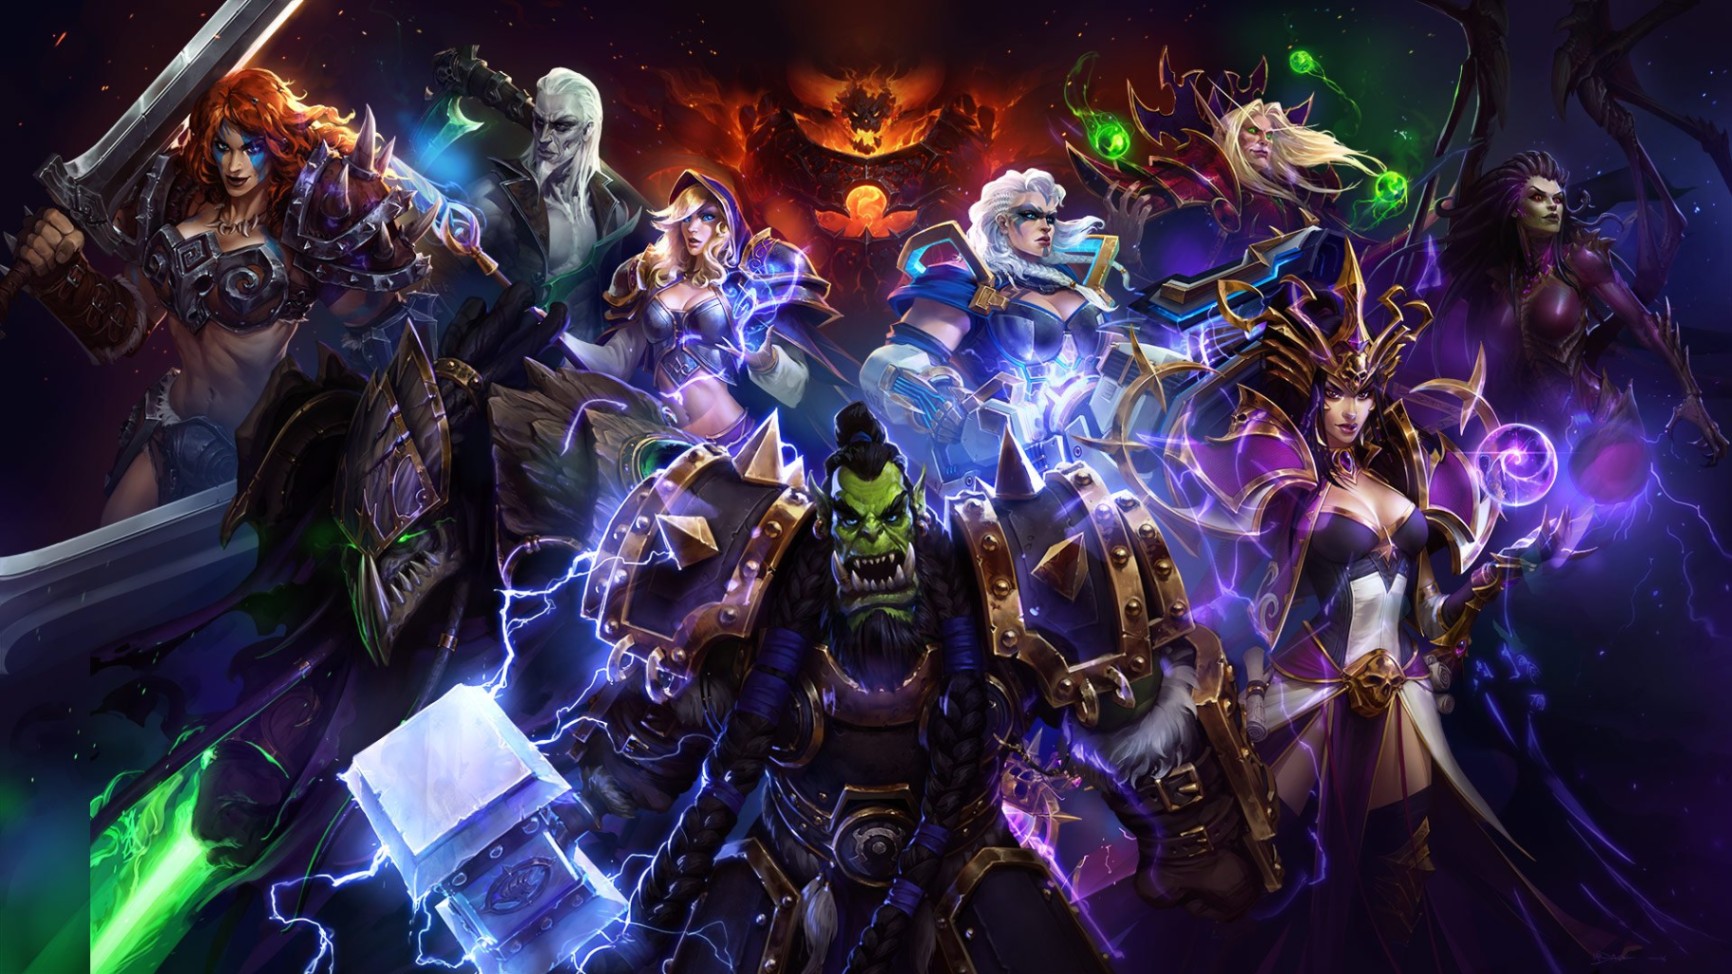 The Best Ways To Get Gold, Gems, And Shards In Heroes Of The Storm